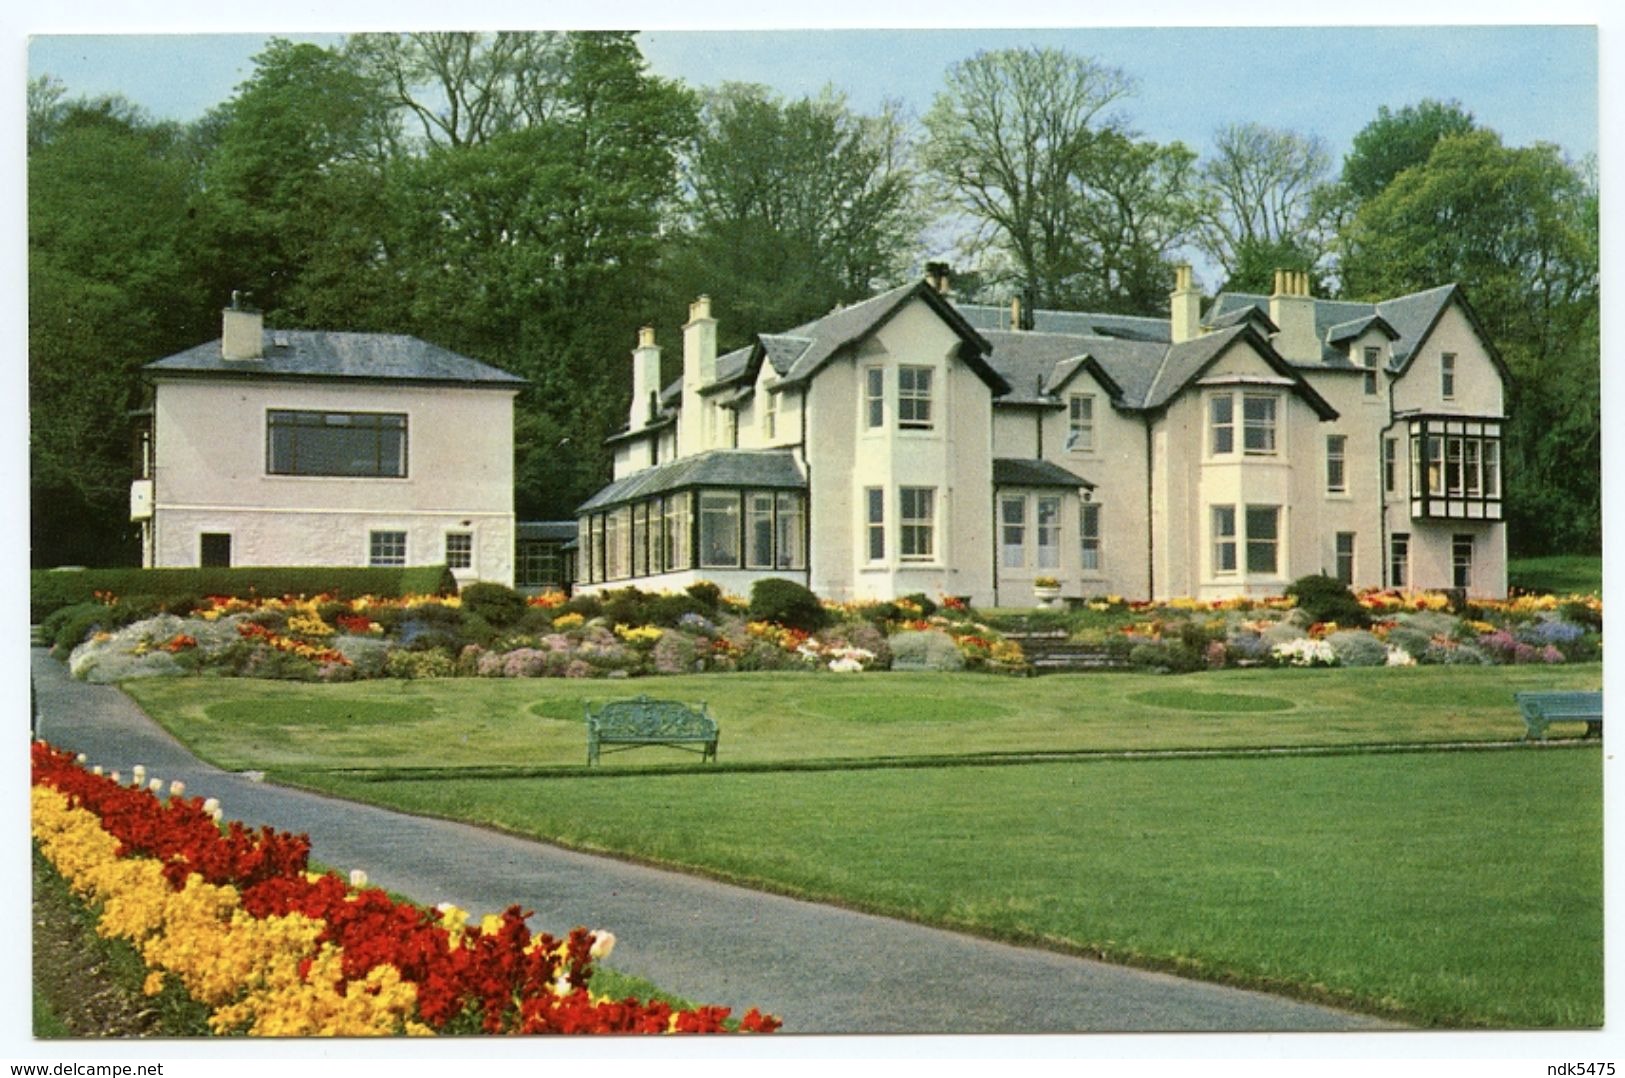 ISLE OF BUTE : ROTHESAY - THE RAILWAY CONVALESCENT HOME, ASCOG MANSION - Bute